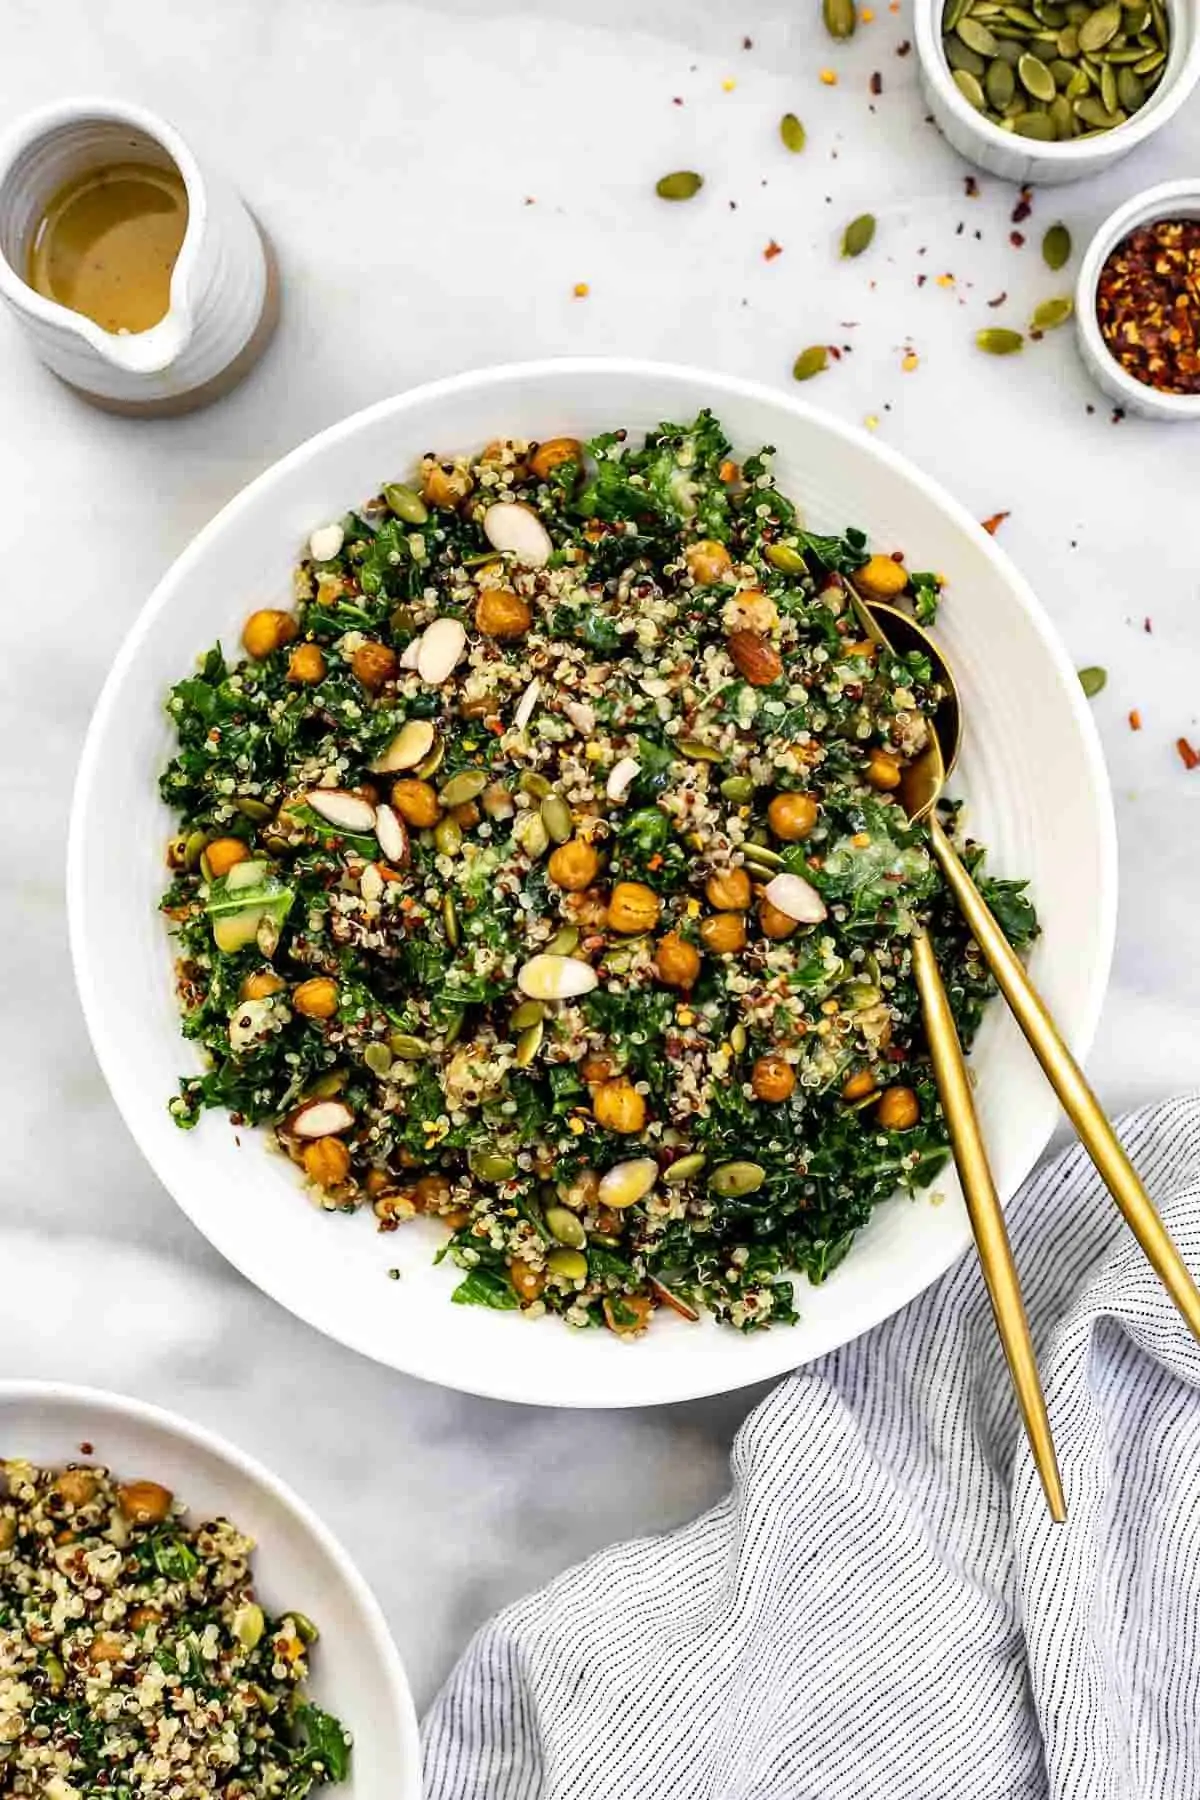 Kale quinoa salad in a white bowl with a stripped towel.